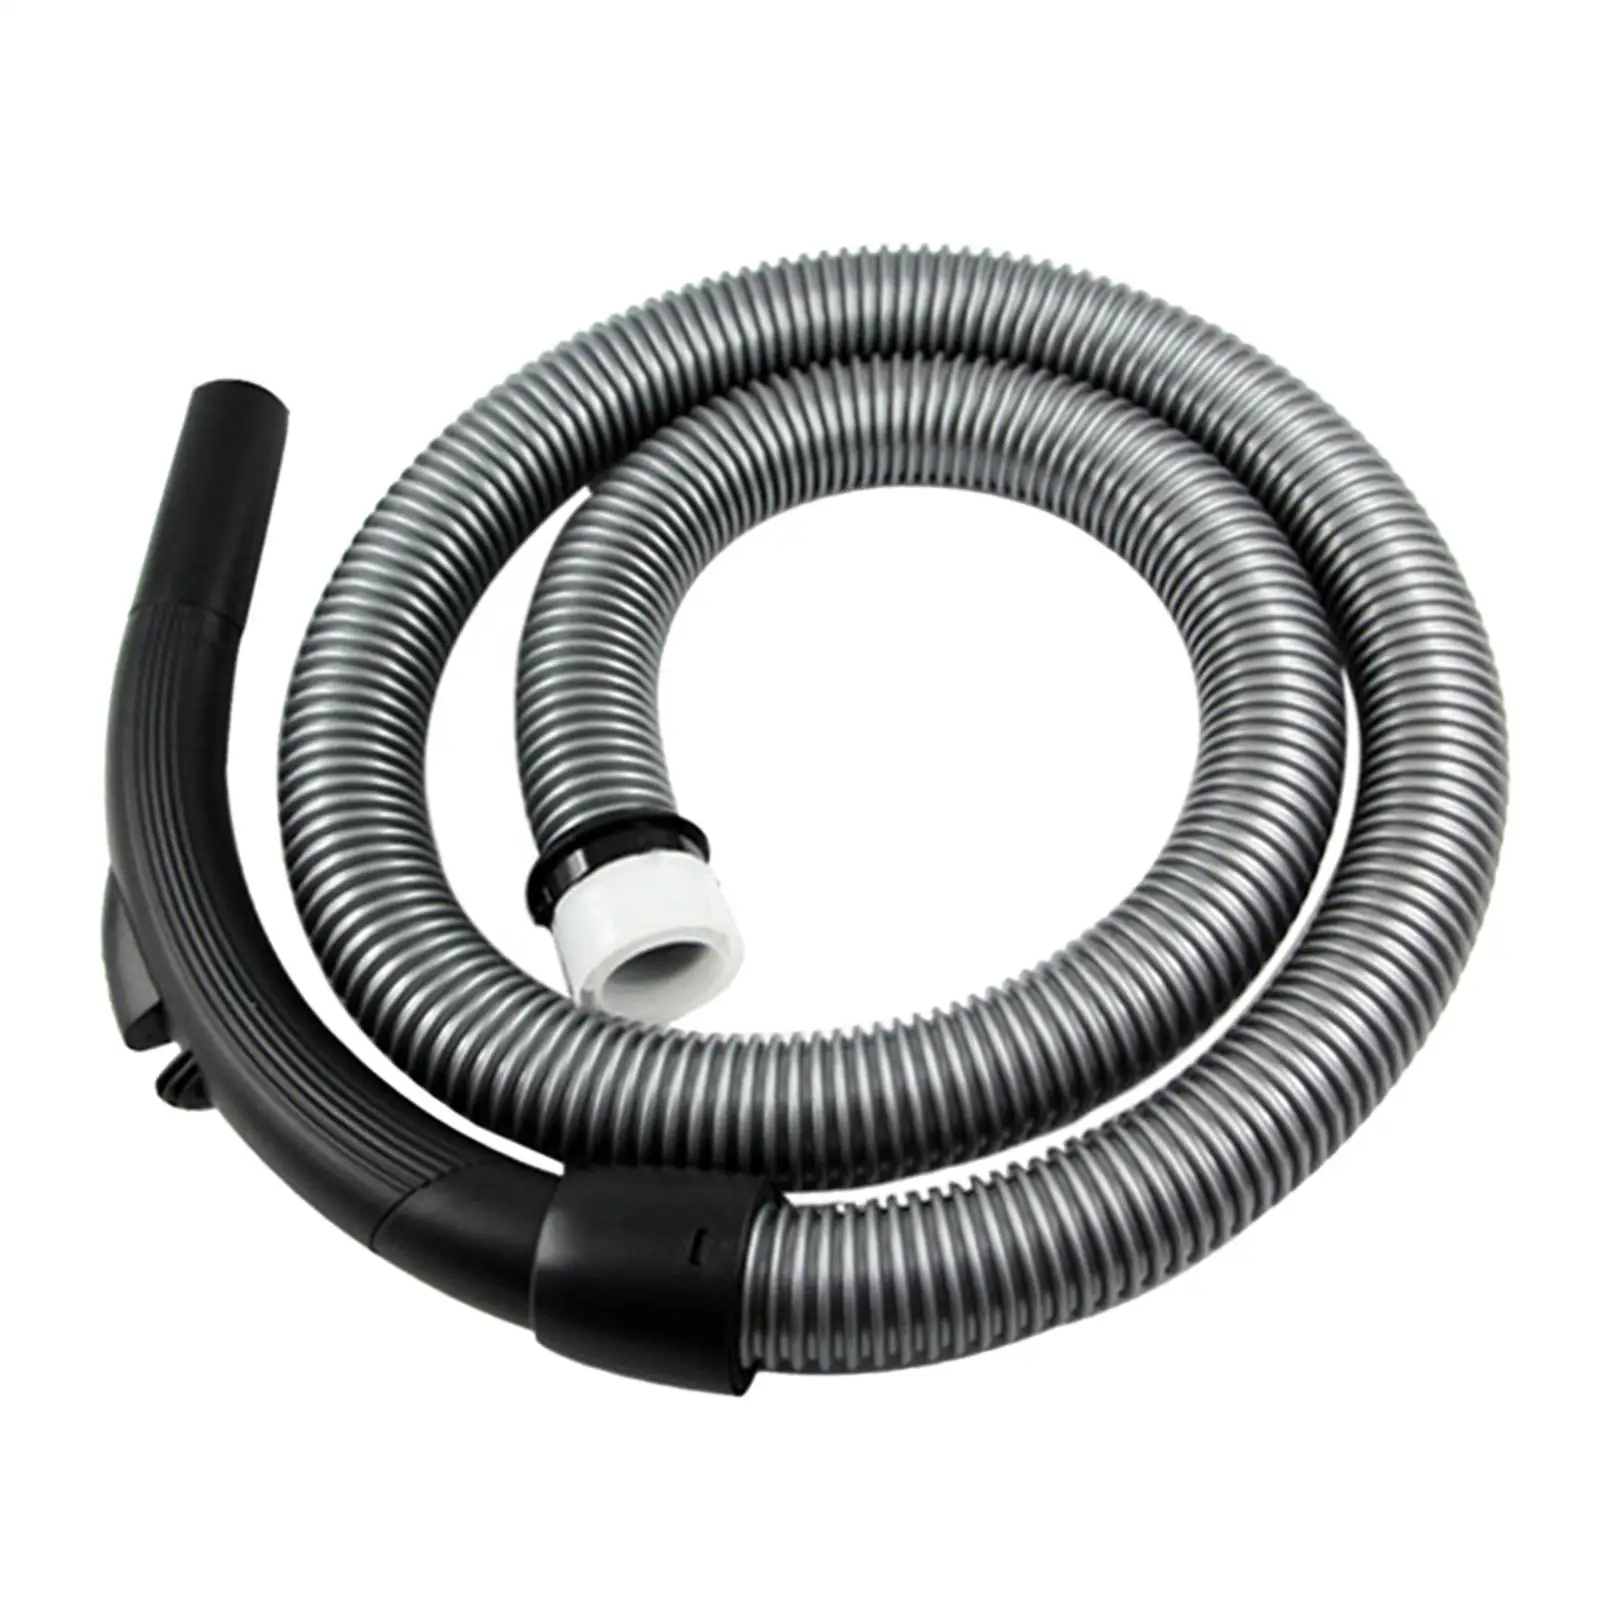 Universal Vacuum Hose Replacement Extension Pipe Hose Kit 32mm Dust Collection Vacuum Cleaner Accessories Quick Release 1.8M